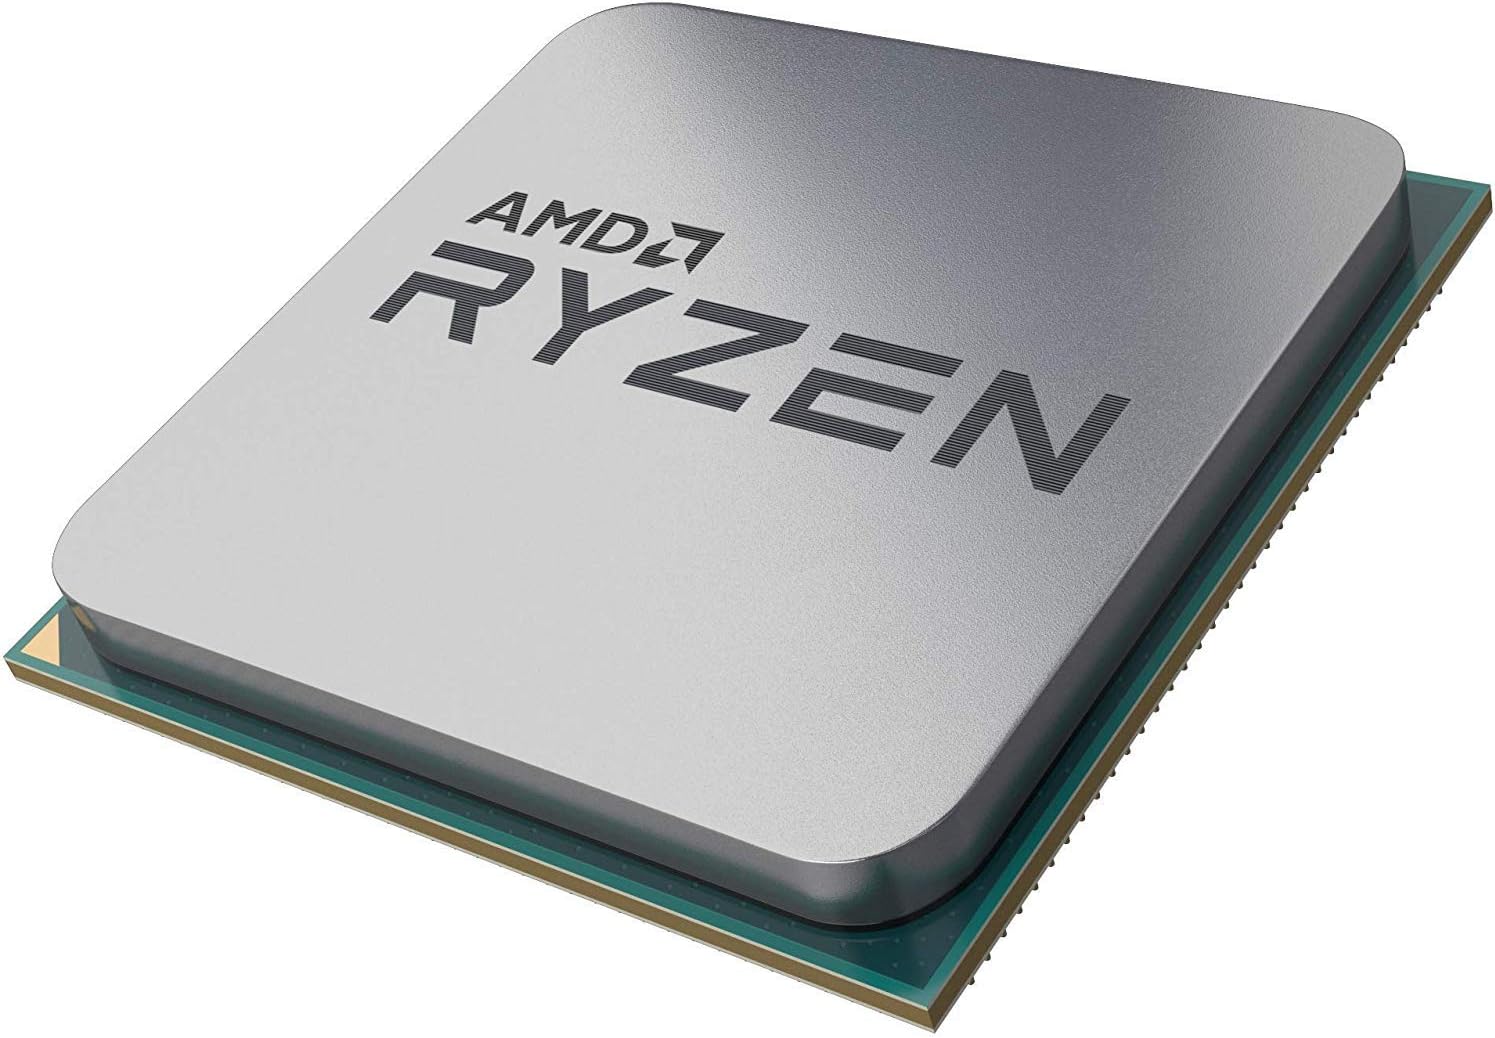 AMD Ryzen 5 3600 - Advanced 6-core processor with 12 threads for multitasking 0730143314299